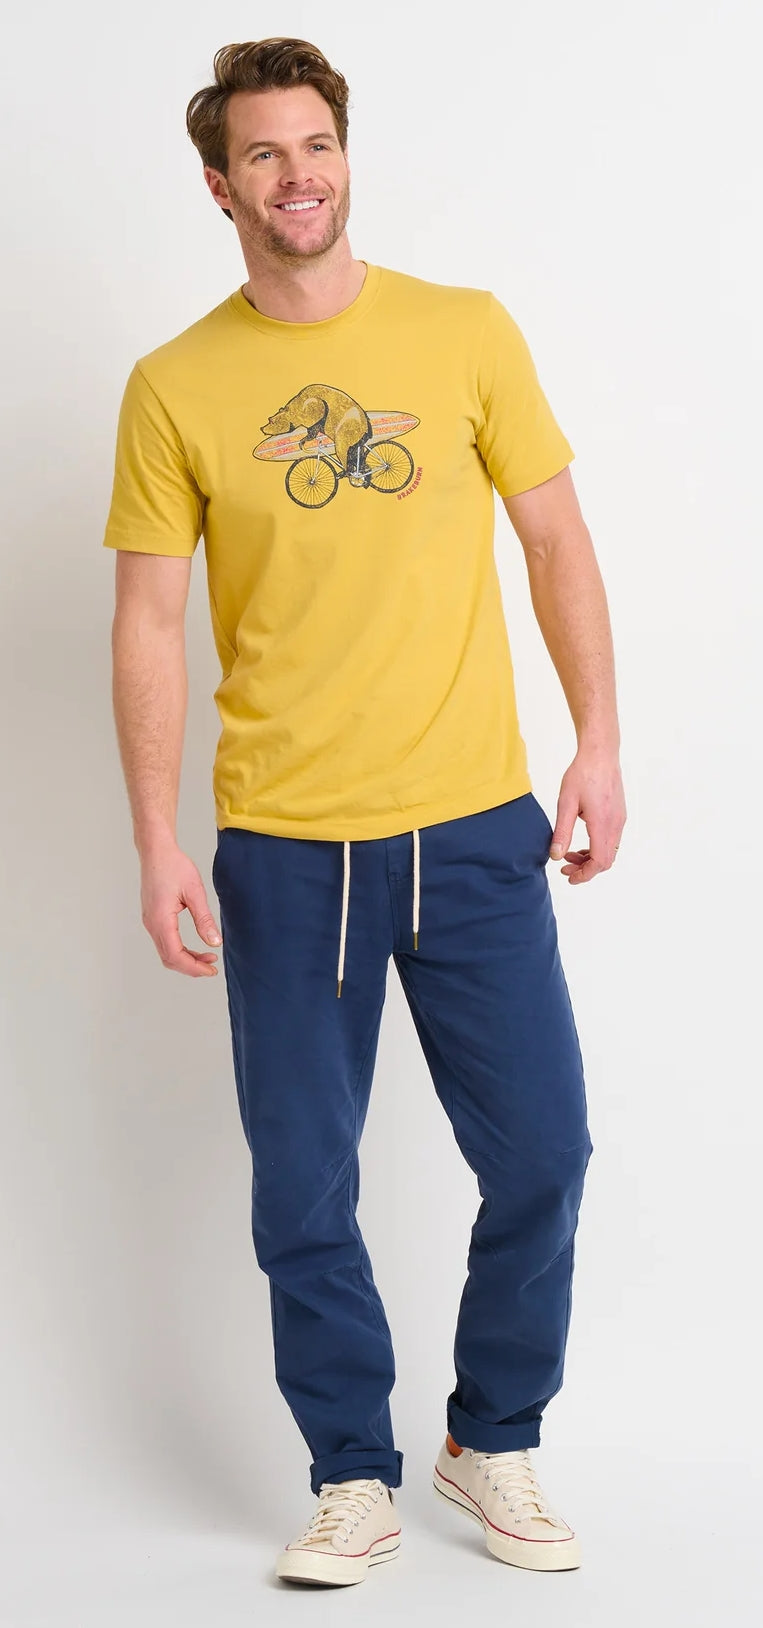 Brakeburn men's tee with a print of a bear on a bicycle with a surfboard